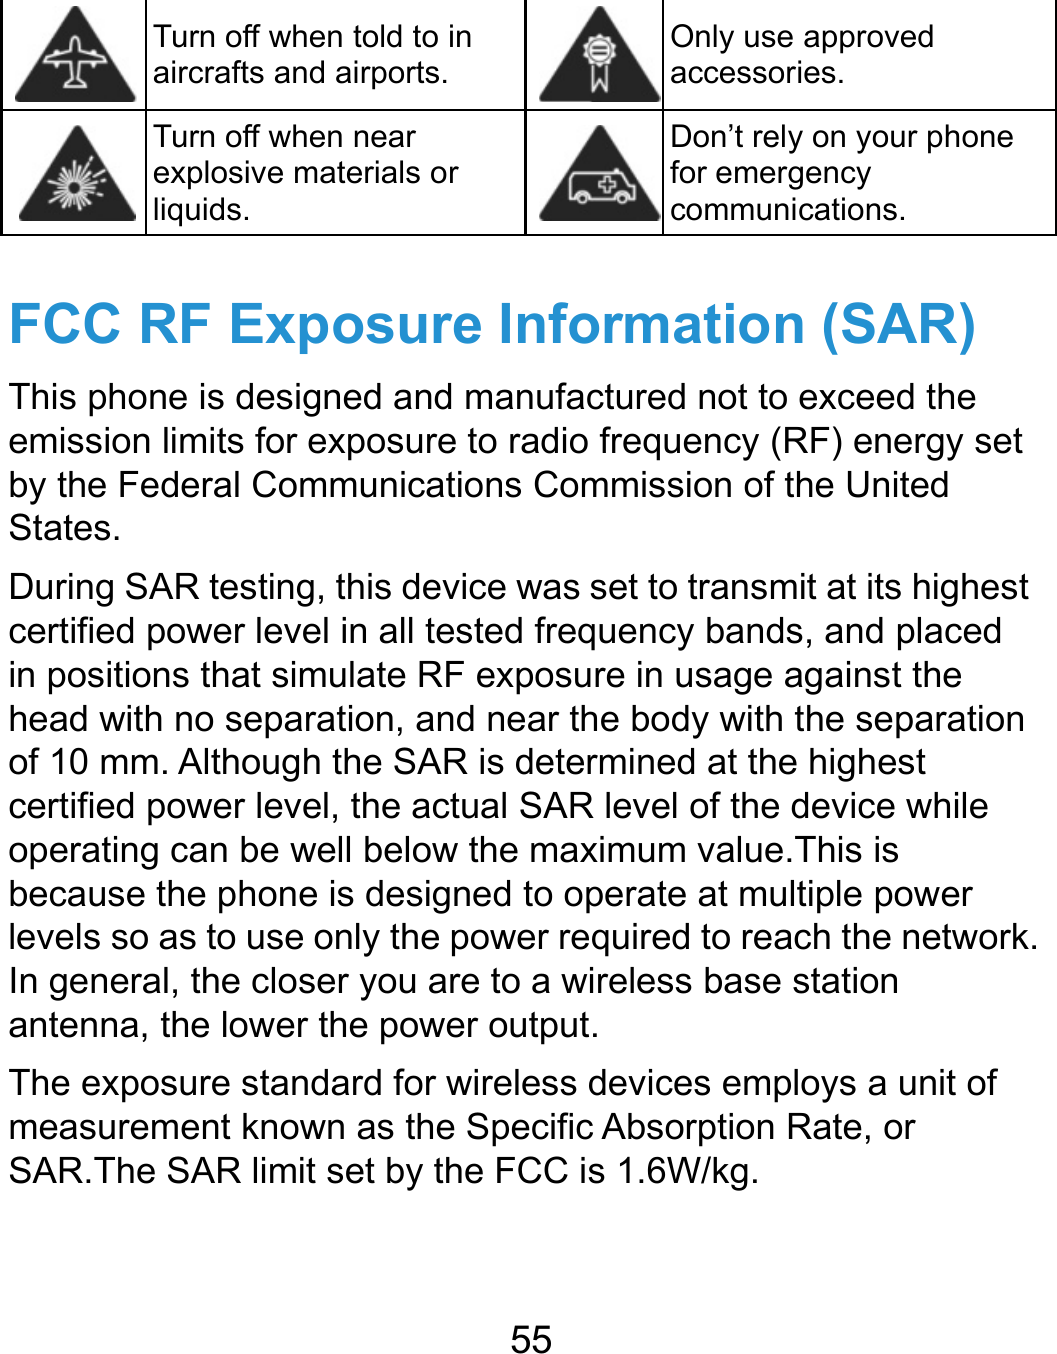  55  Turn off when told to in aircrafts and airports. Only use approved accessories.  Turn off when near explosive materials or liquids. Don’t rely on your phone for emergency communications.  FCC RF Exposure Information (SAR) This phone is designed and manufactured not to exceed the emission limits for exposure to radio frequency (RF) energy set by the Federal Communications Commission of the United States. During SAR testing, this device was set to transmit at its highest certified power level in all tested frequency bands, and placed in positions that simulate RF exposure in usage against the head with no separation, and near the body with the separation of 10 mm. Although the SAR is determined at the highest certified power level, the actual SAR level of the device while operating can be well below the maximum value.This is because the phone is designed to operate at multiple power levels so as to use only the power required to reach the network. In general, the closer you are to a wireless base station antenna, the lower the power output. The exposure standard for wireless devices employs a unit of measurement known as the Specific Absorption Rate, or SAR.The SAR limit set by the FCC is 1.6W/kg.  